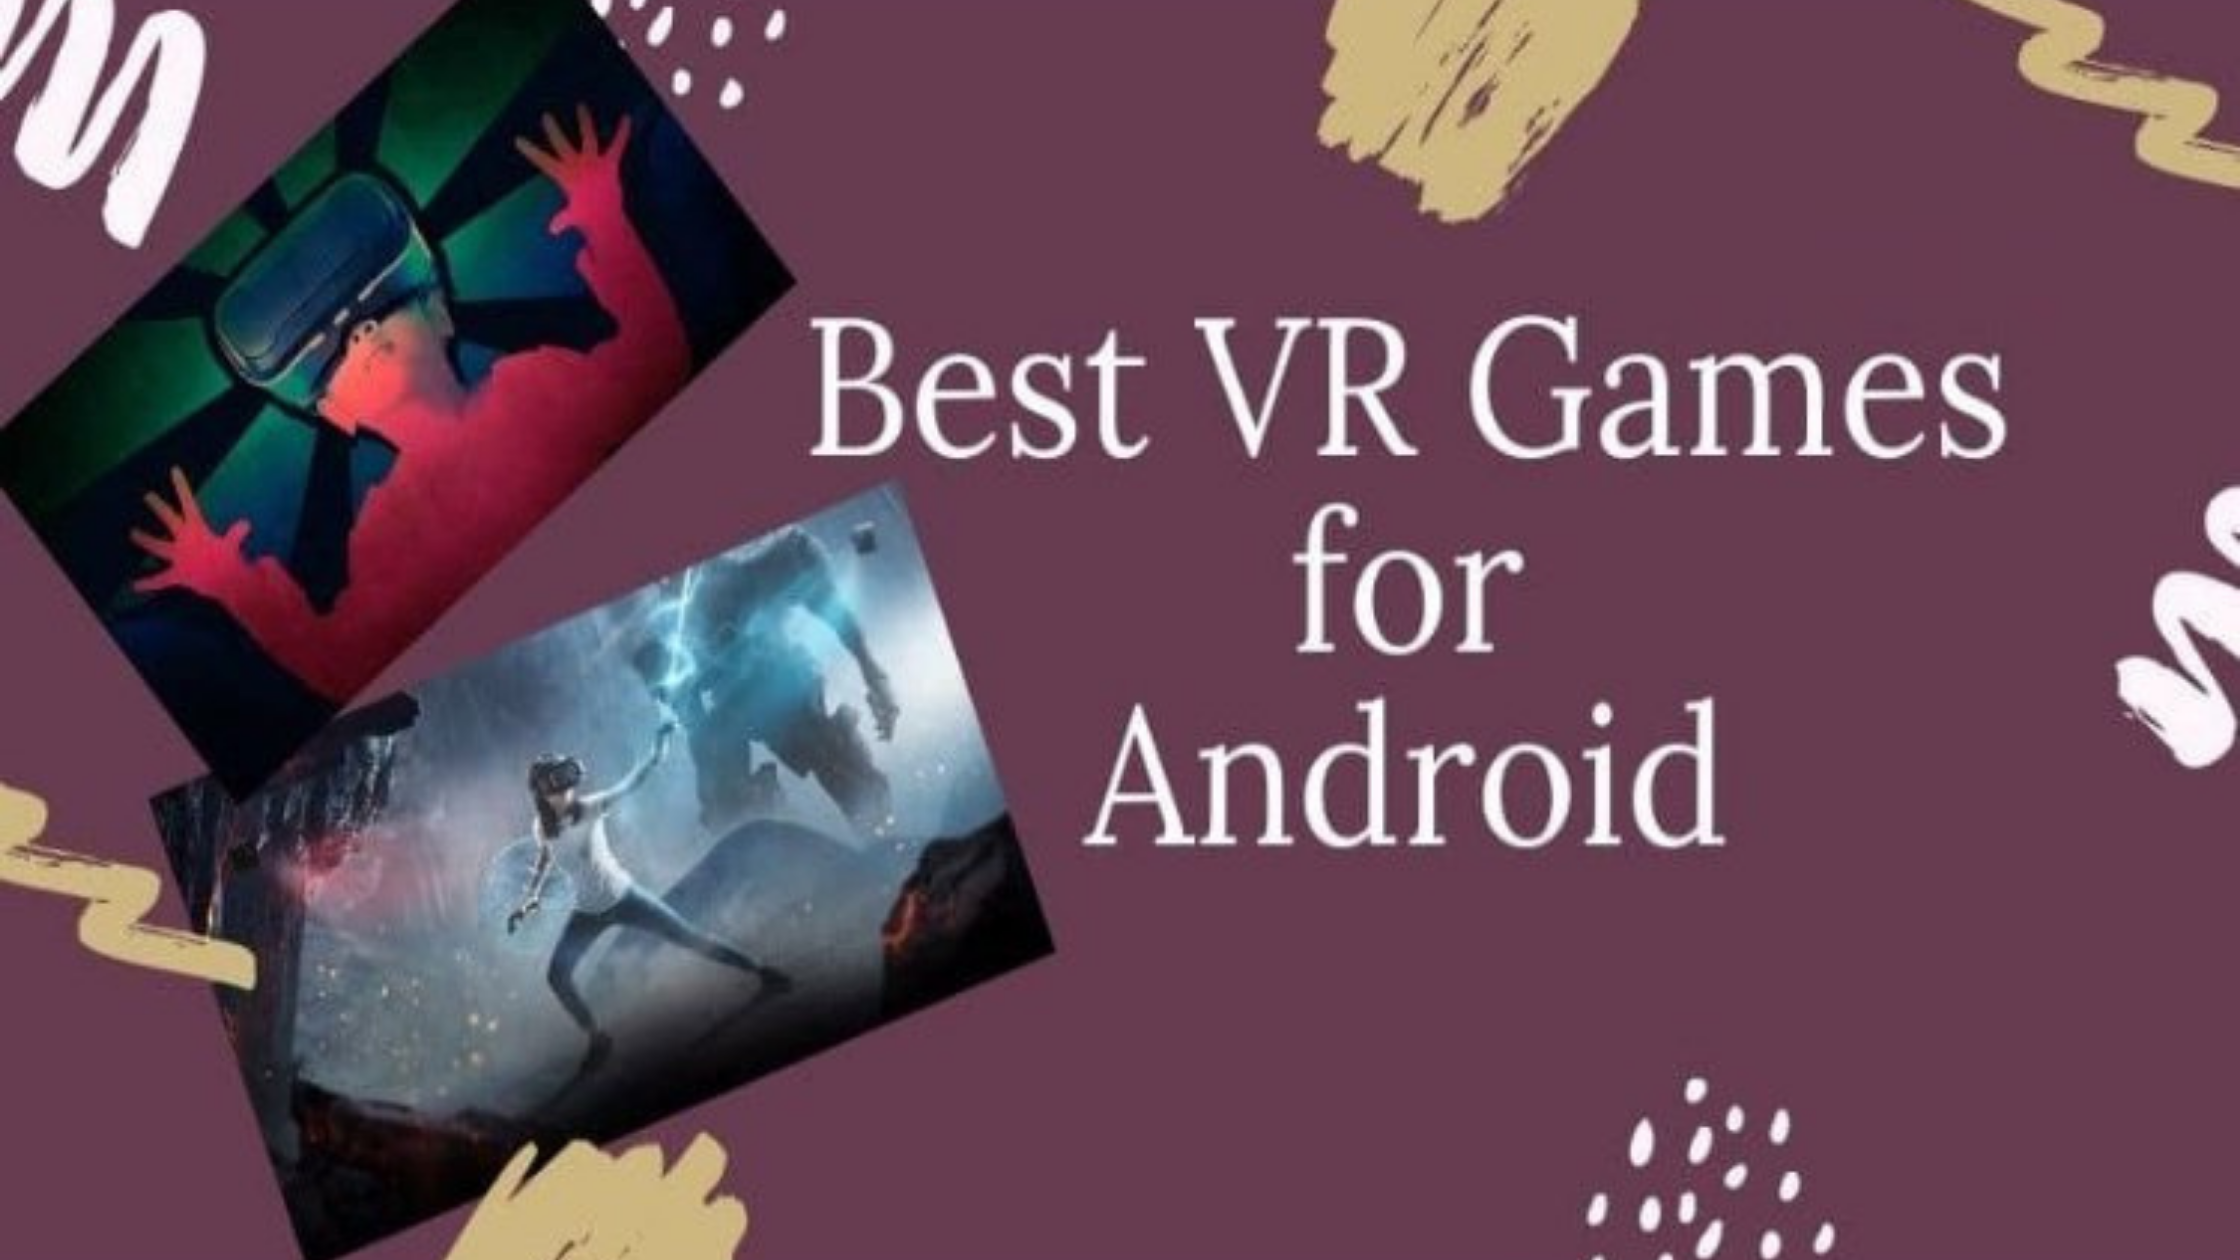 Best VR Games for Android in 2021